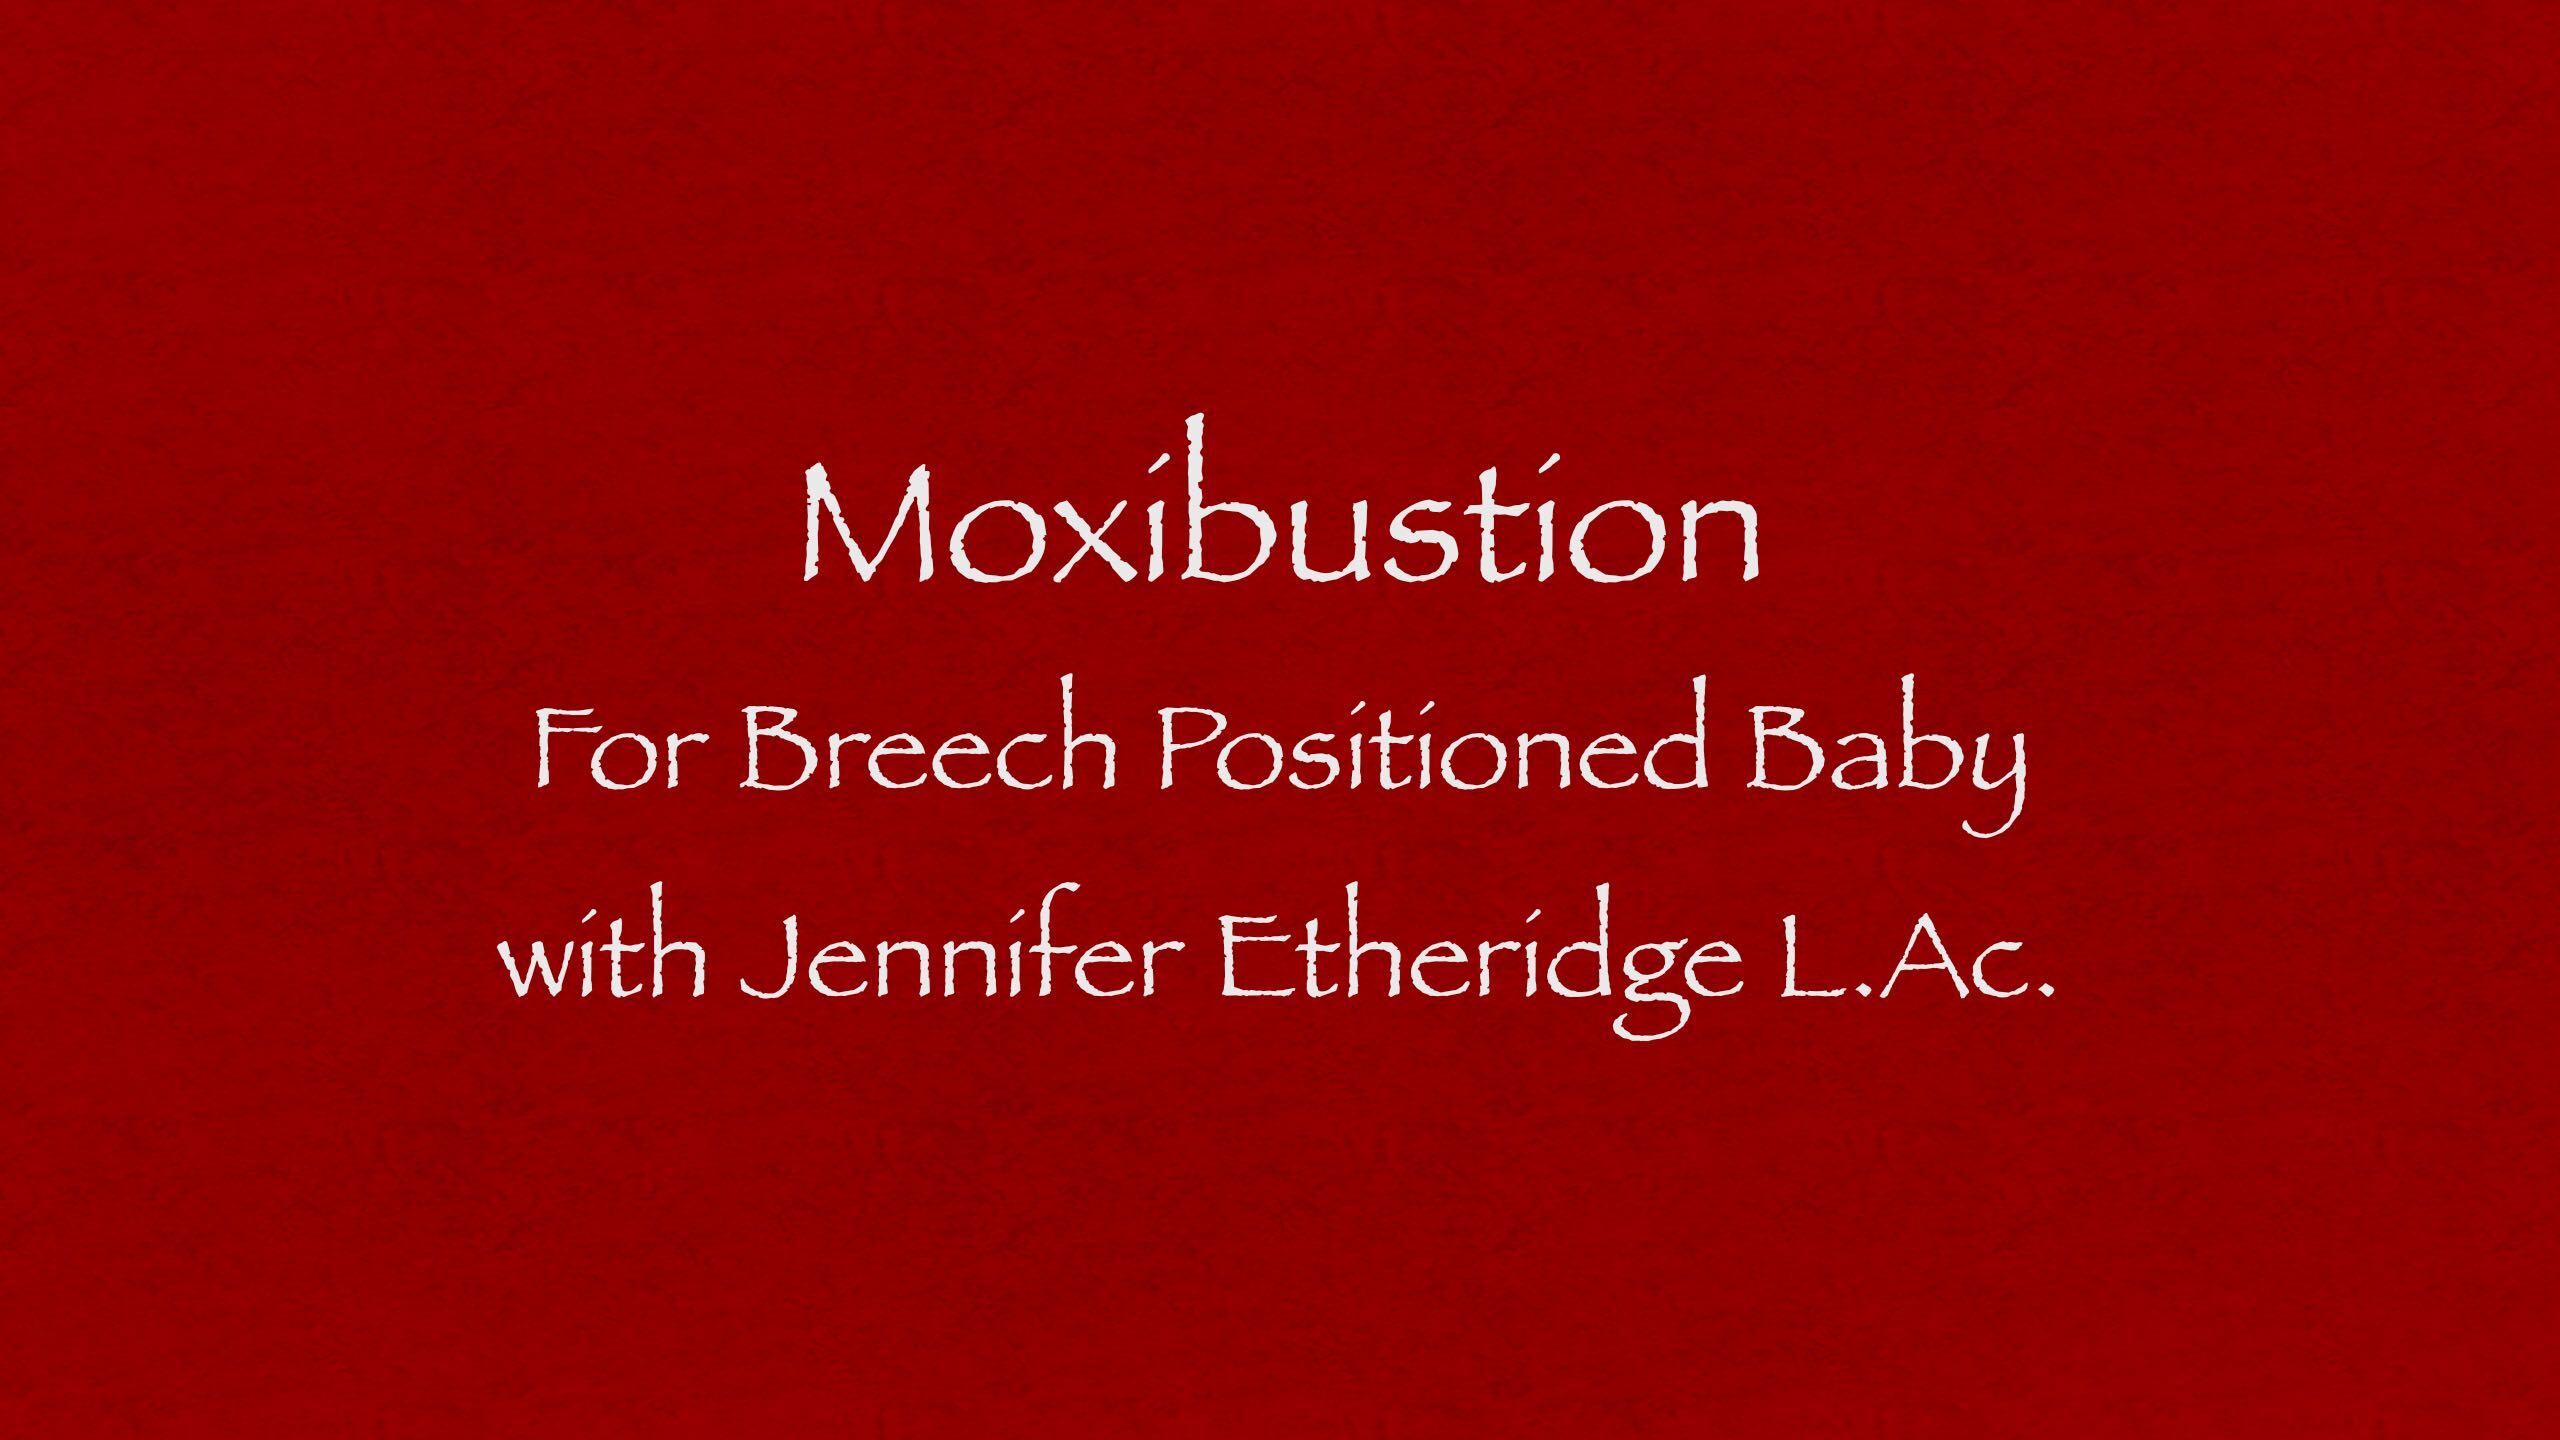 Moxibustion for breech positioned baby with Jennifer Etheridge L.Ac